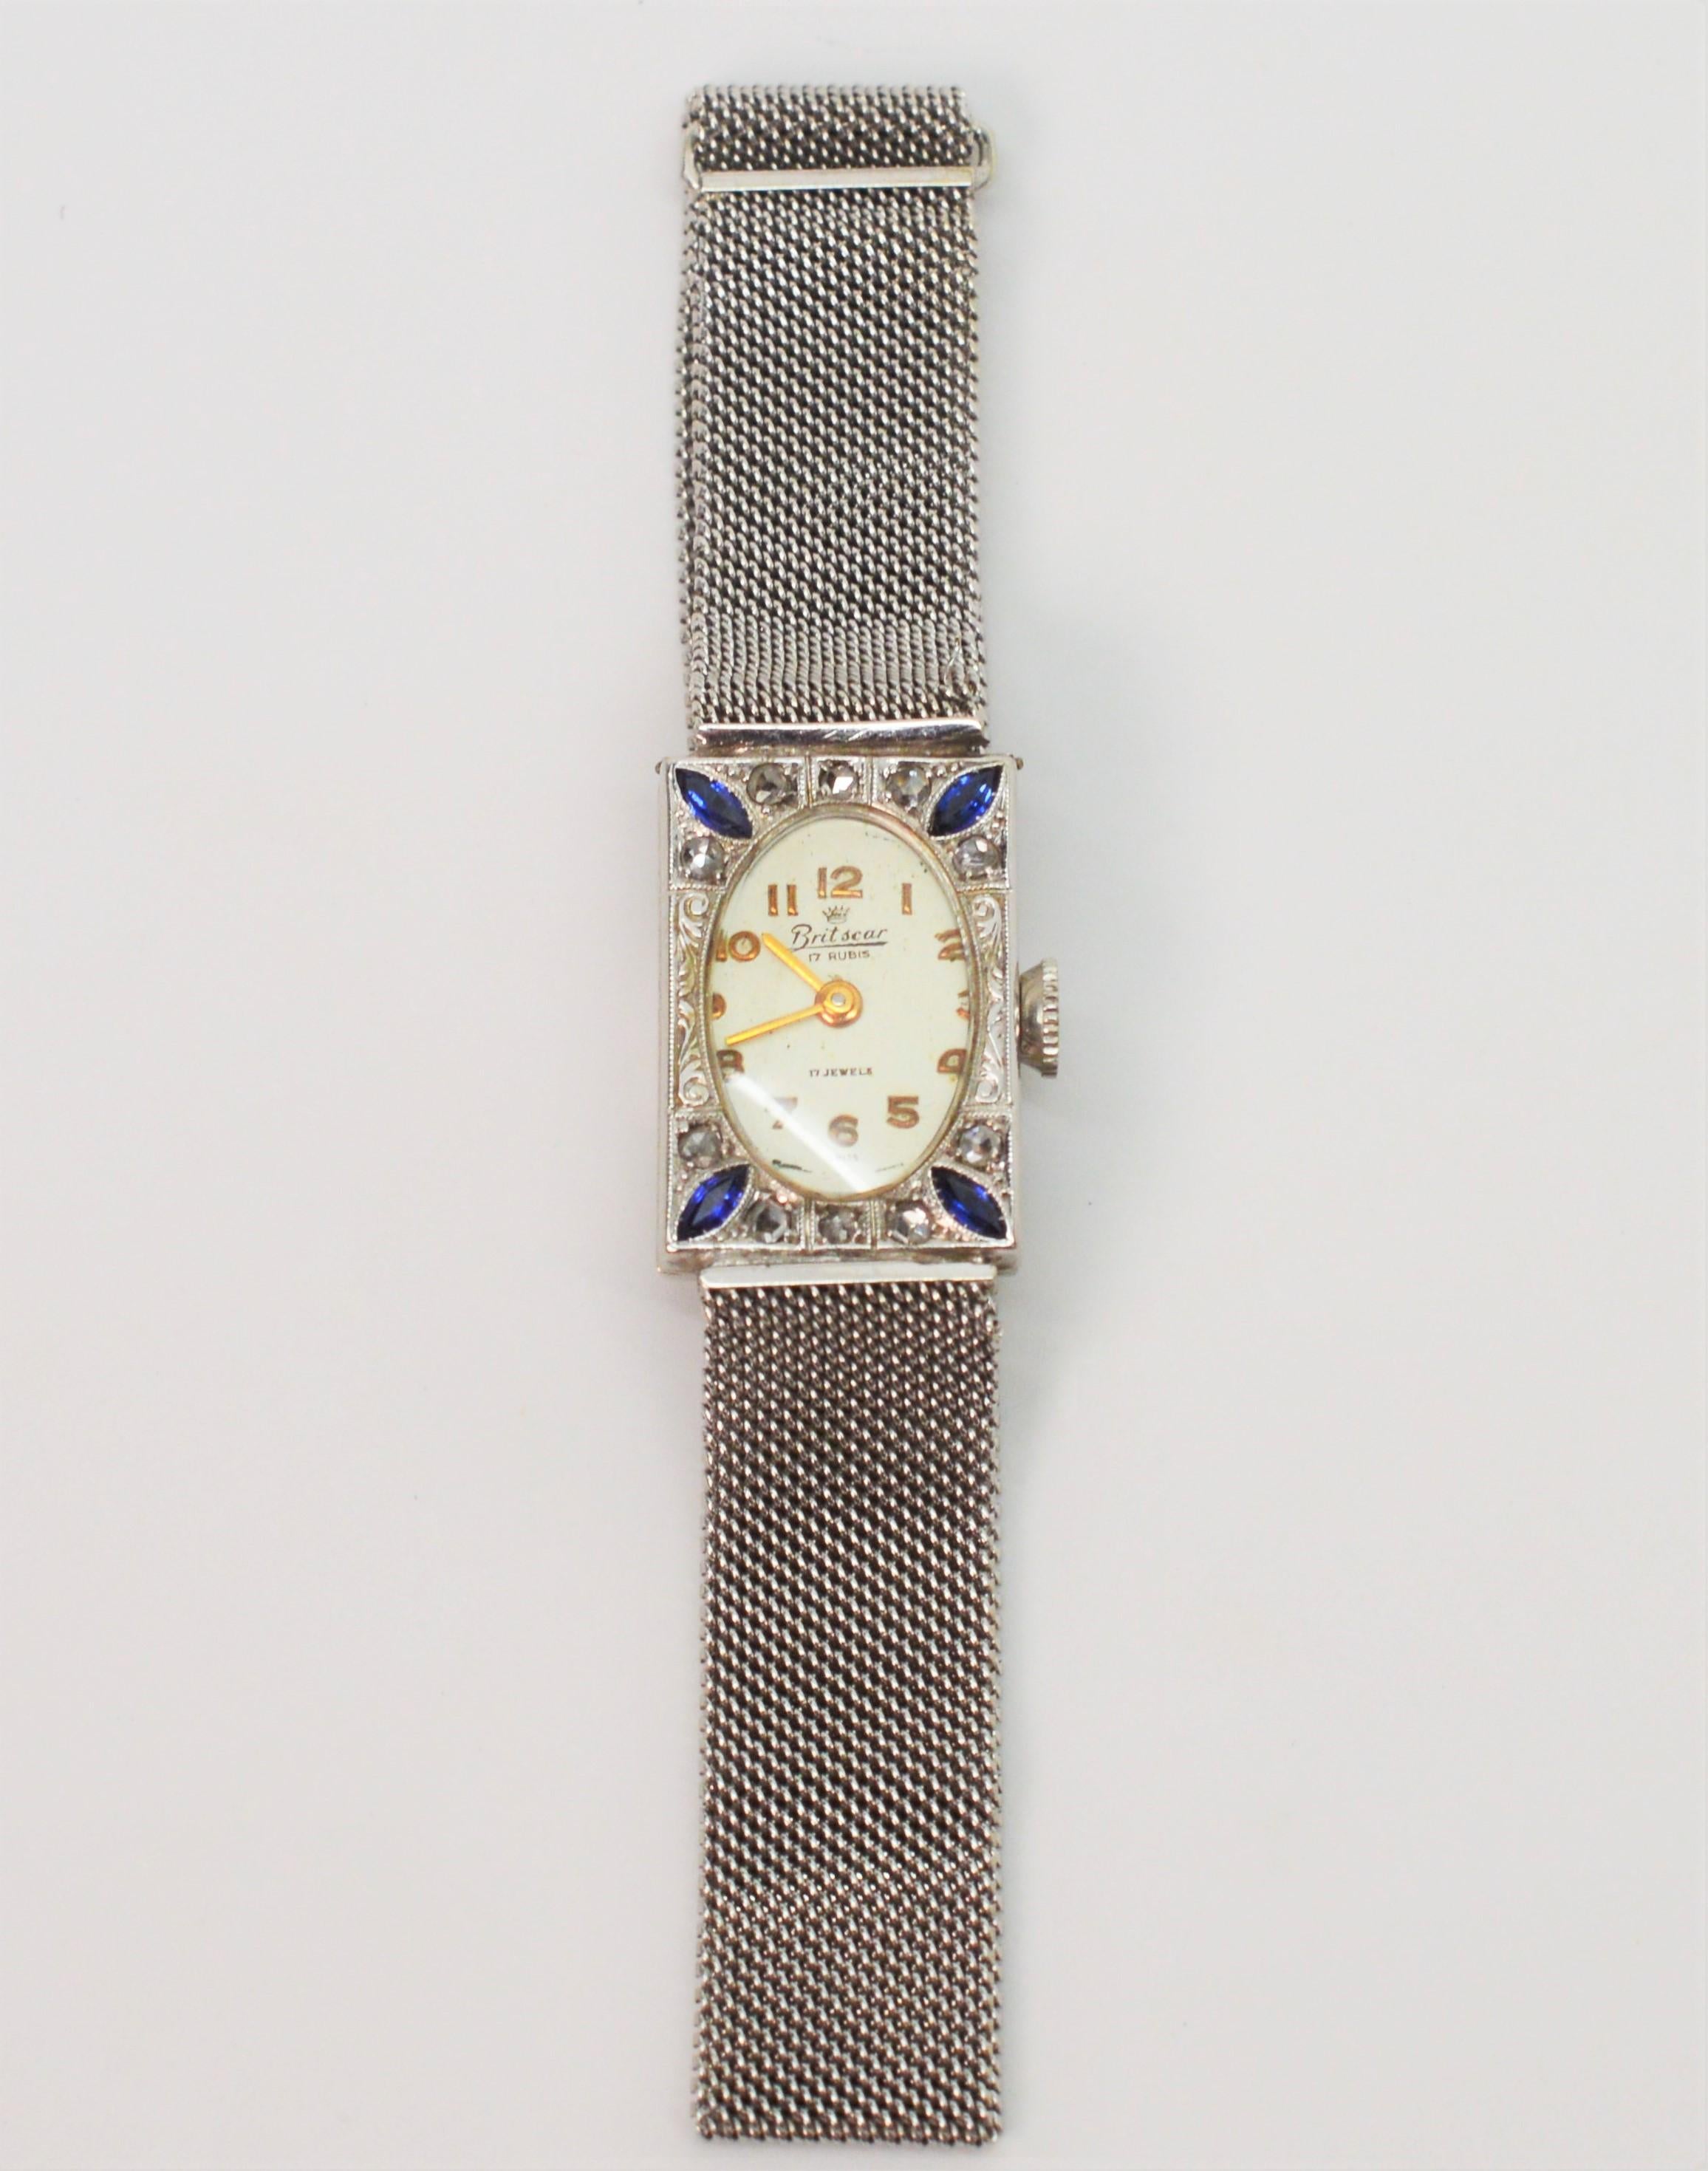 With antique allure, this beautiful ladies art deco Britscar wrist watch, circa 1930's, has a working Swiss 17 jeweled movement. The eighteen karat white gold rectangular watch face measuring approximately 24mm x 26mm is enhanced with ten rose cut